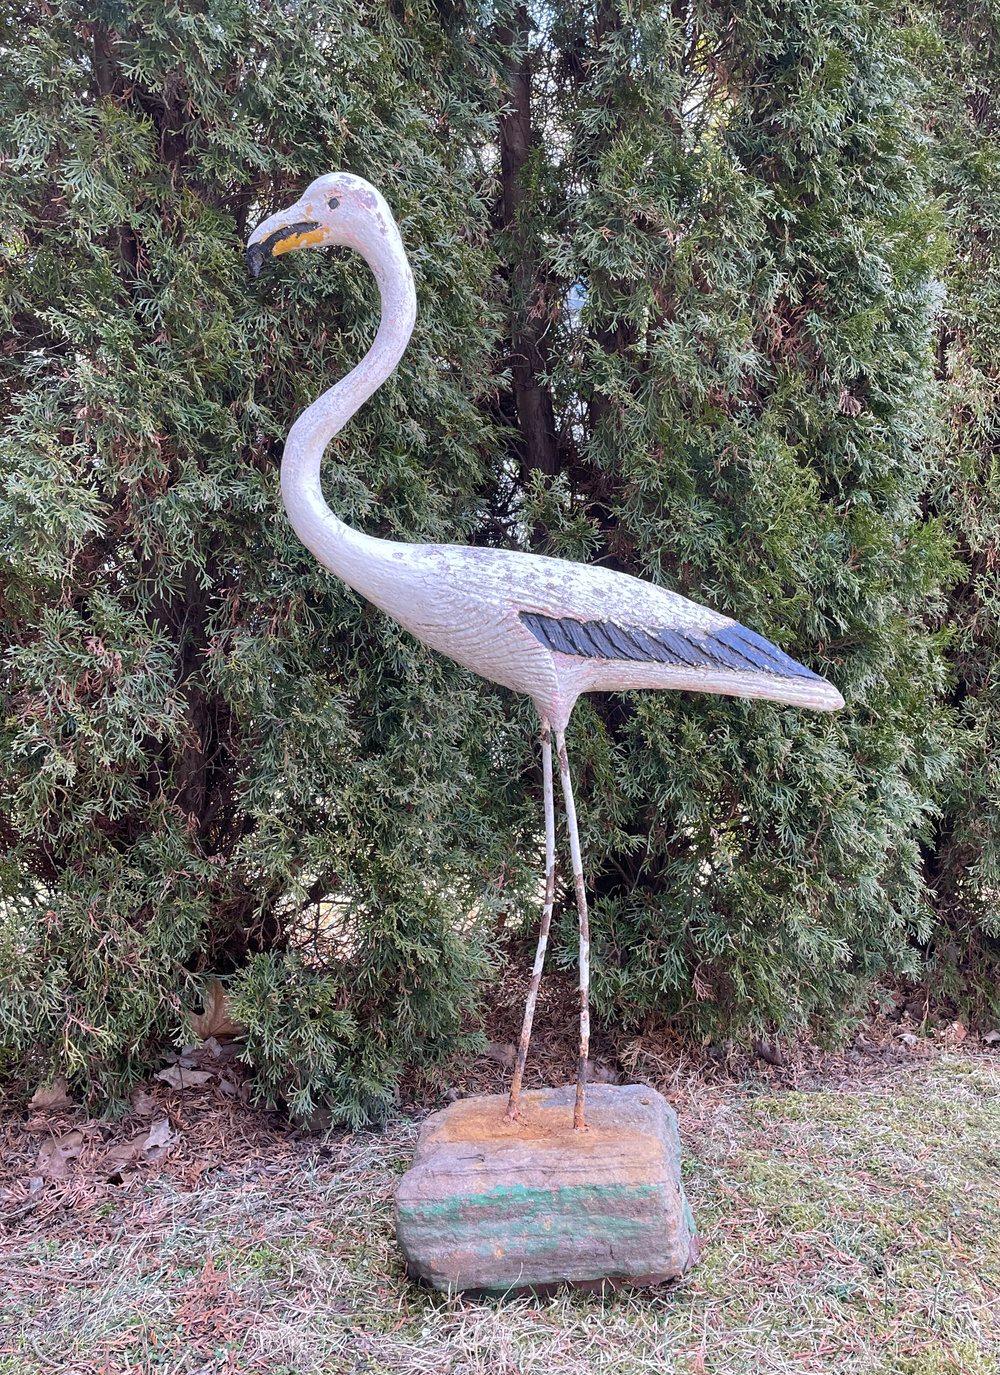 We jumped at the chance to buy a grouping of three early French flamingos, and this is the white flamingo with a black and yellow-trimmed beak and wings. Made of cast stone with iron legs and mounted in a carved stone base, he is very solid and cuts